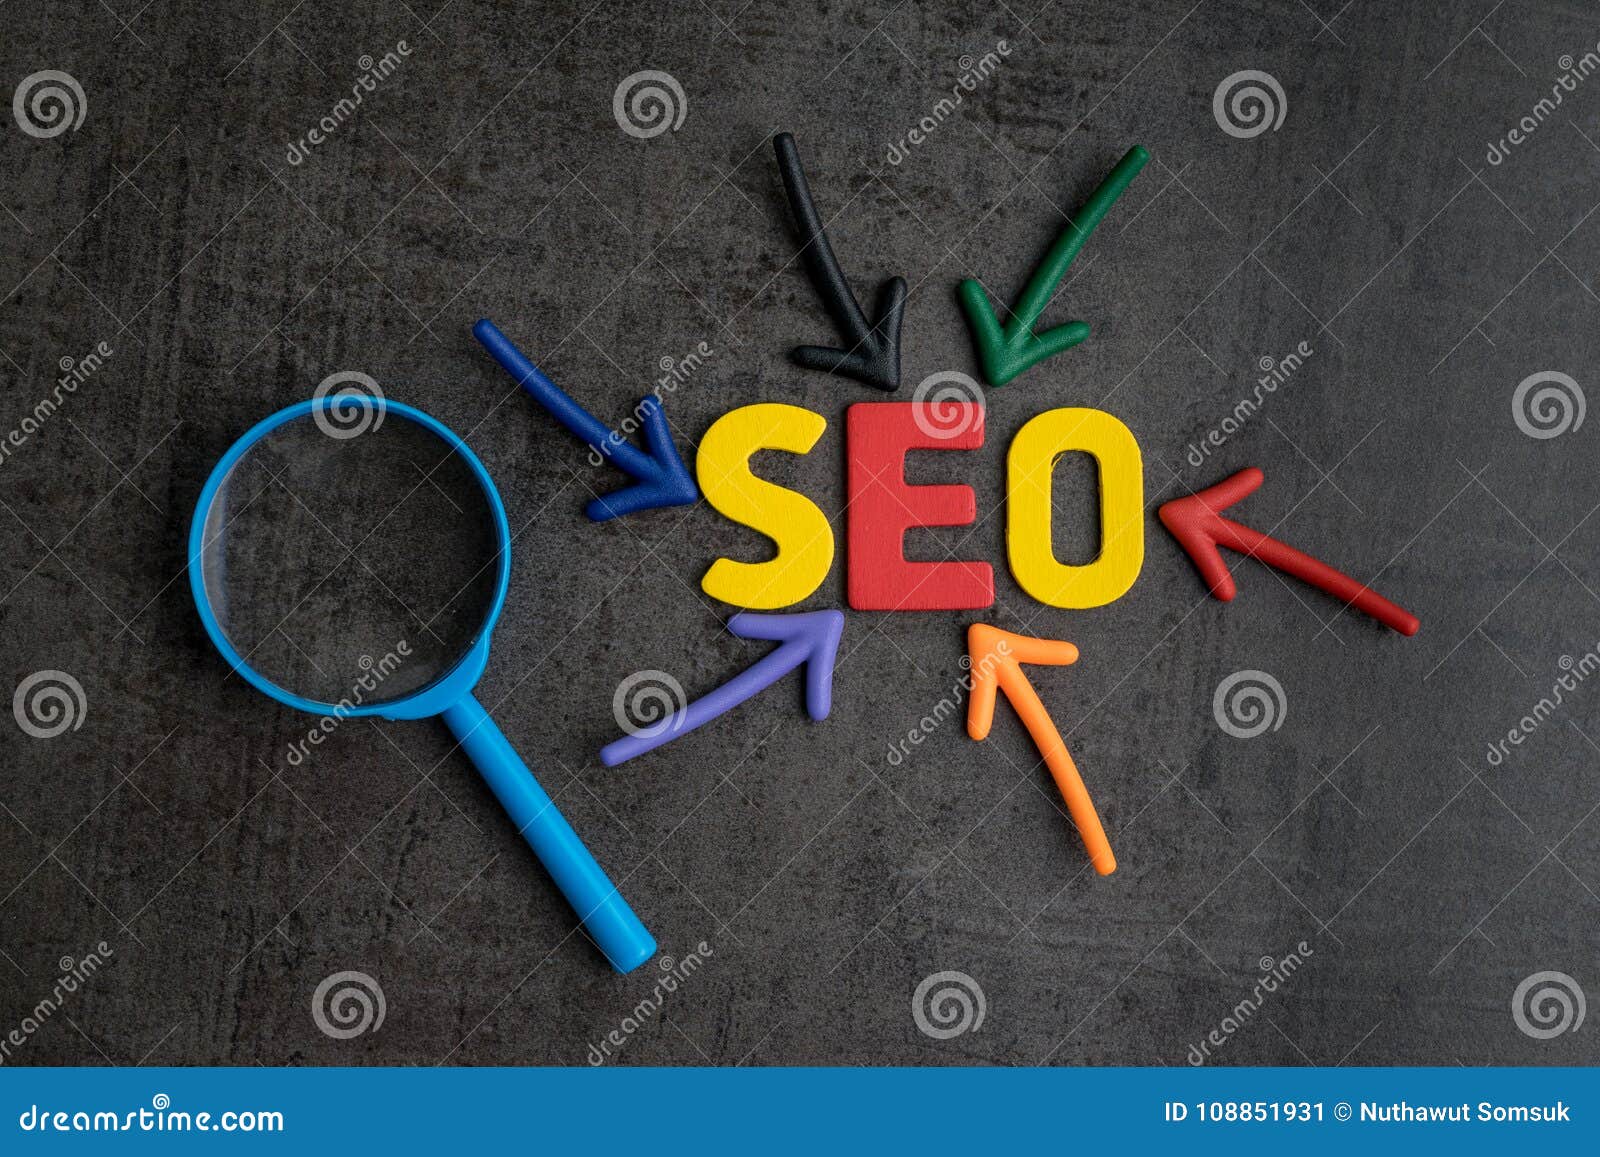 seo, search engine optimization ranking concept, magnifying glass with arrows pointing to alphabets abbreviation